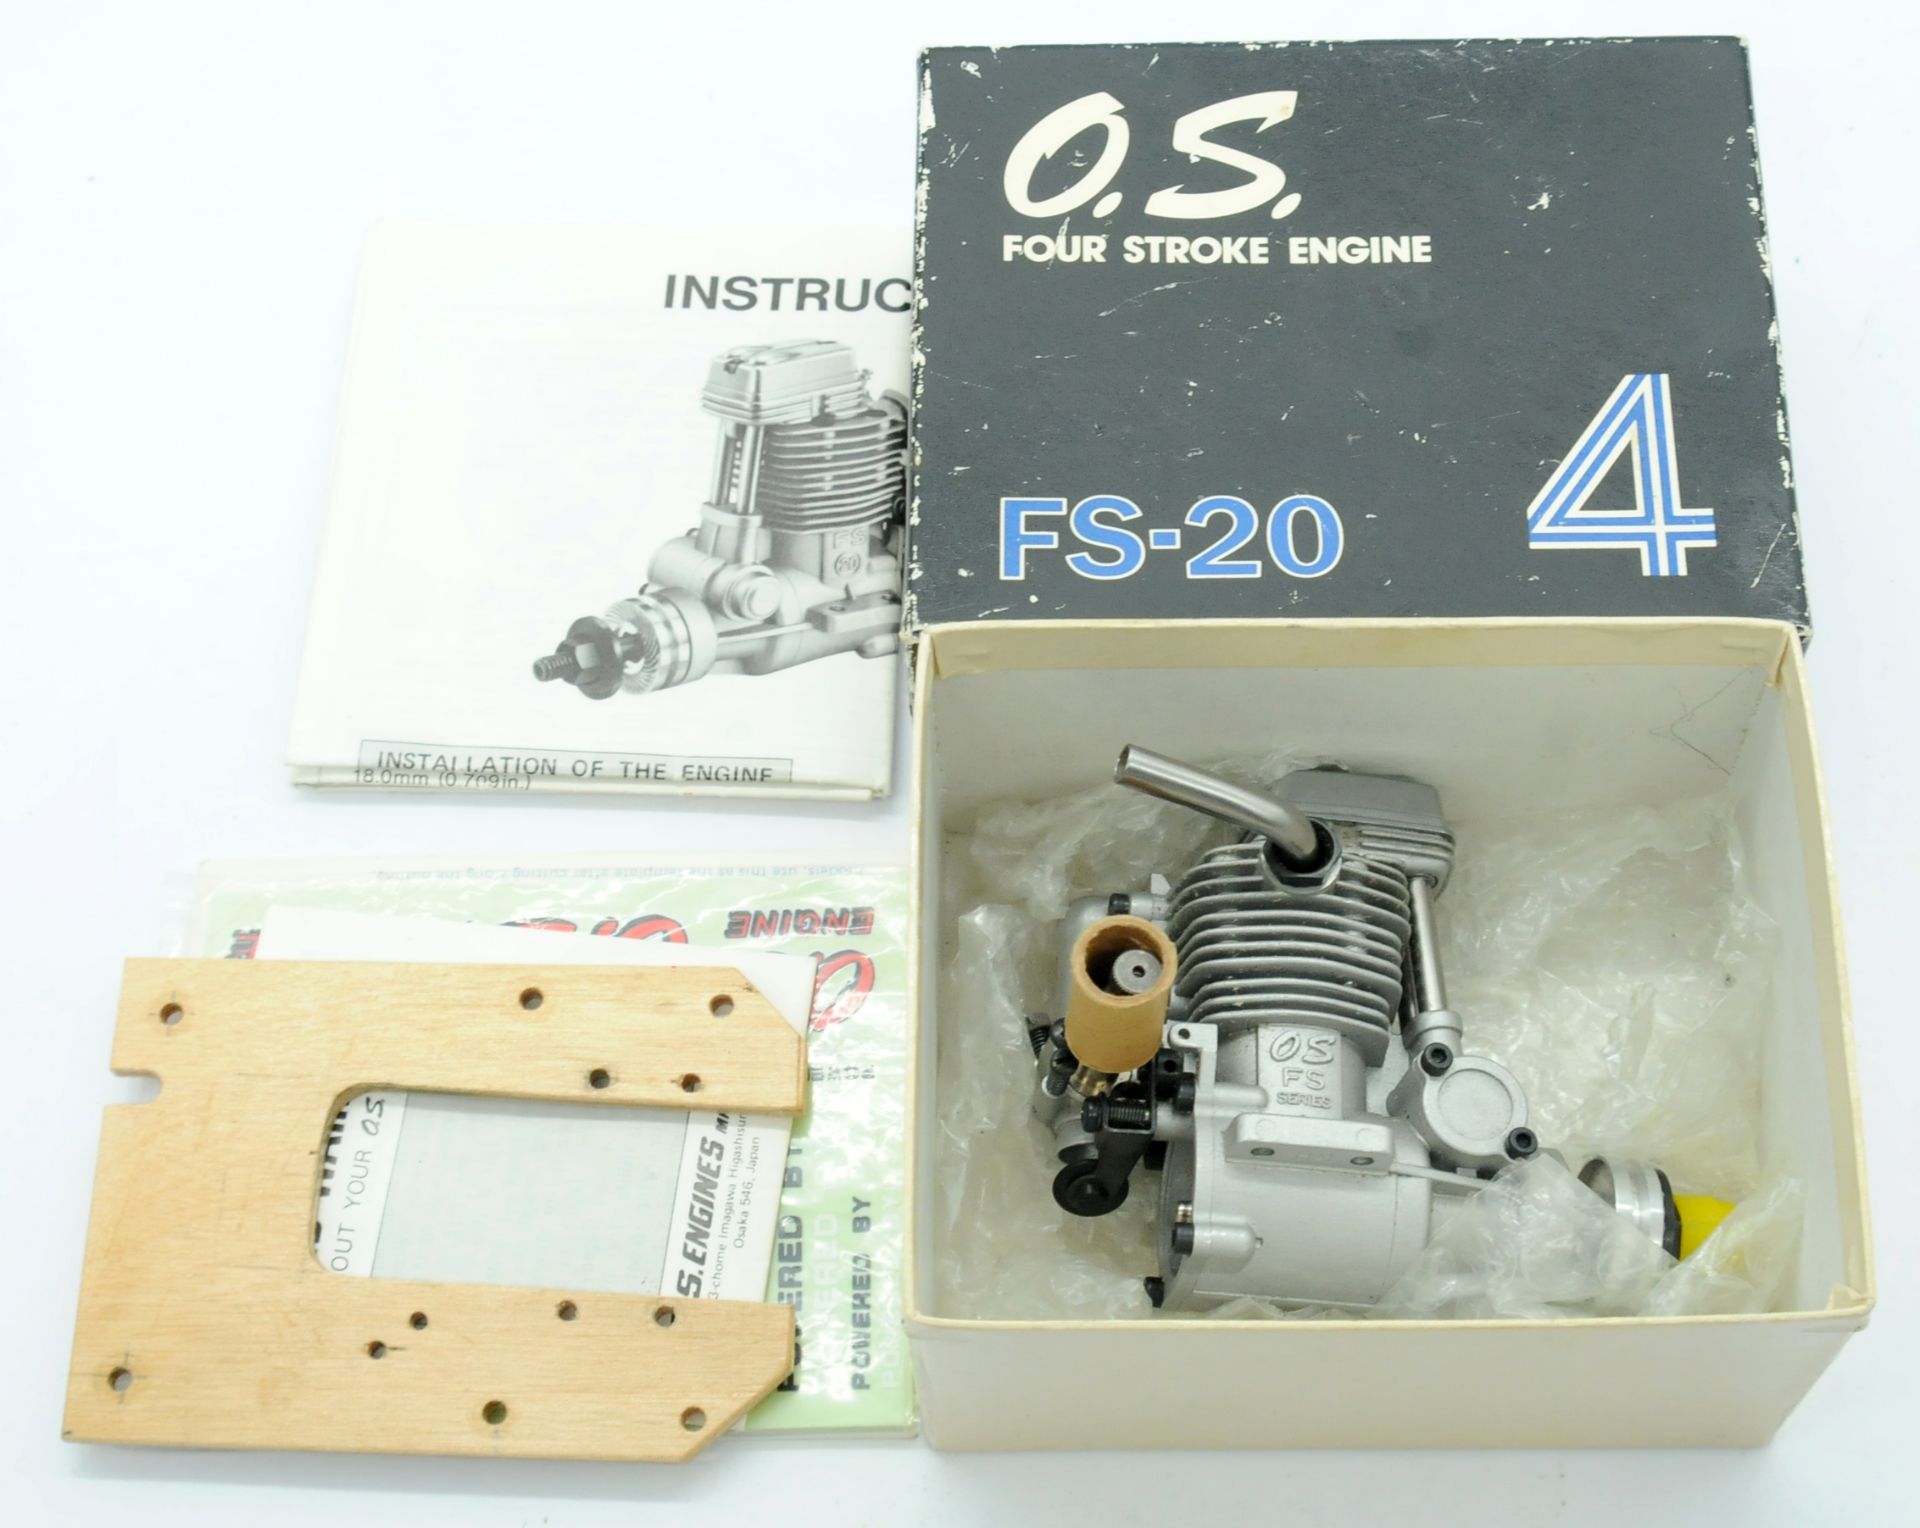 OS Max a boxed FS-20 model engine